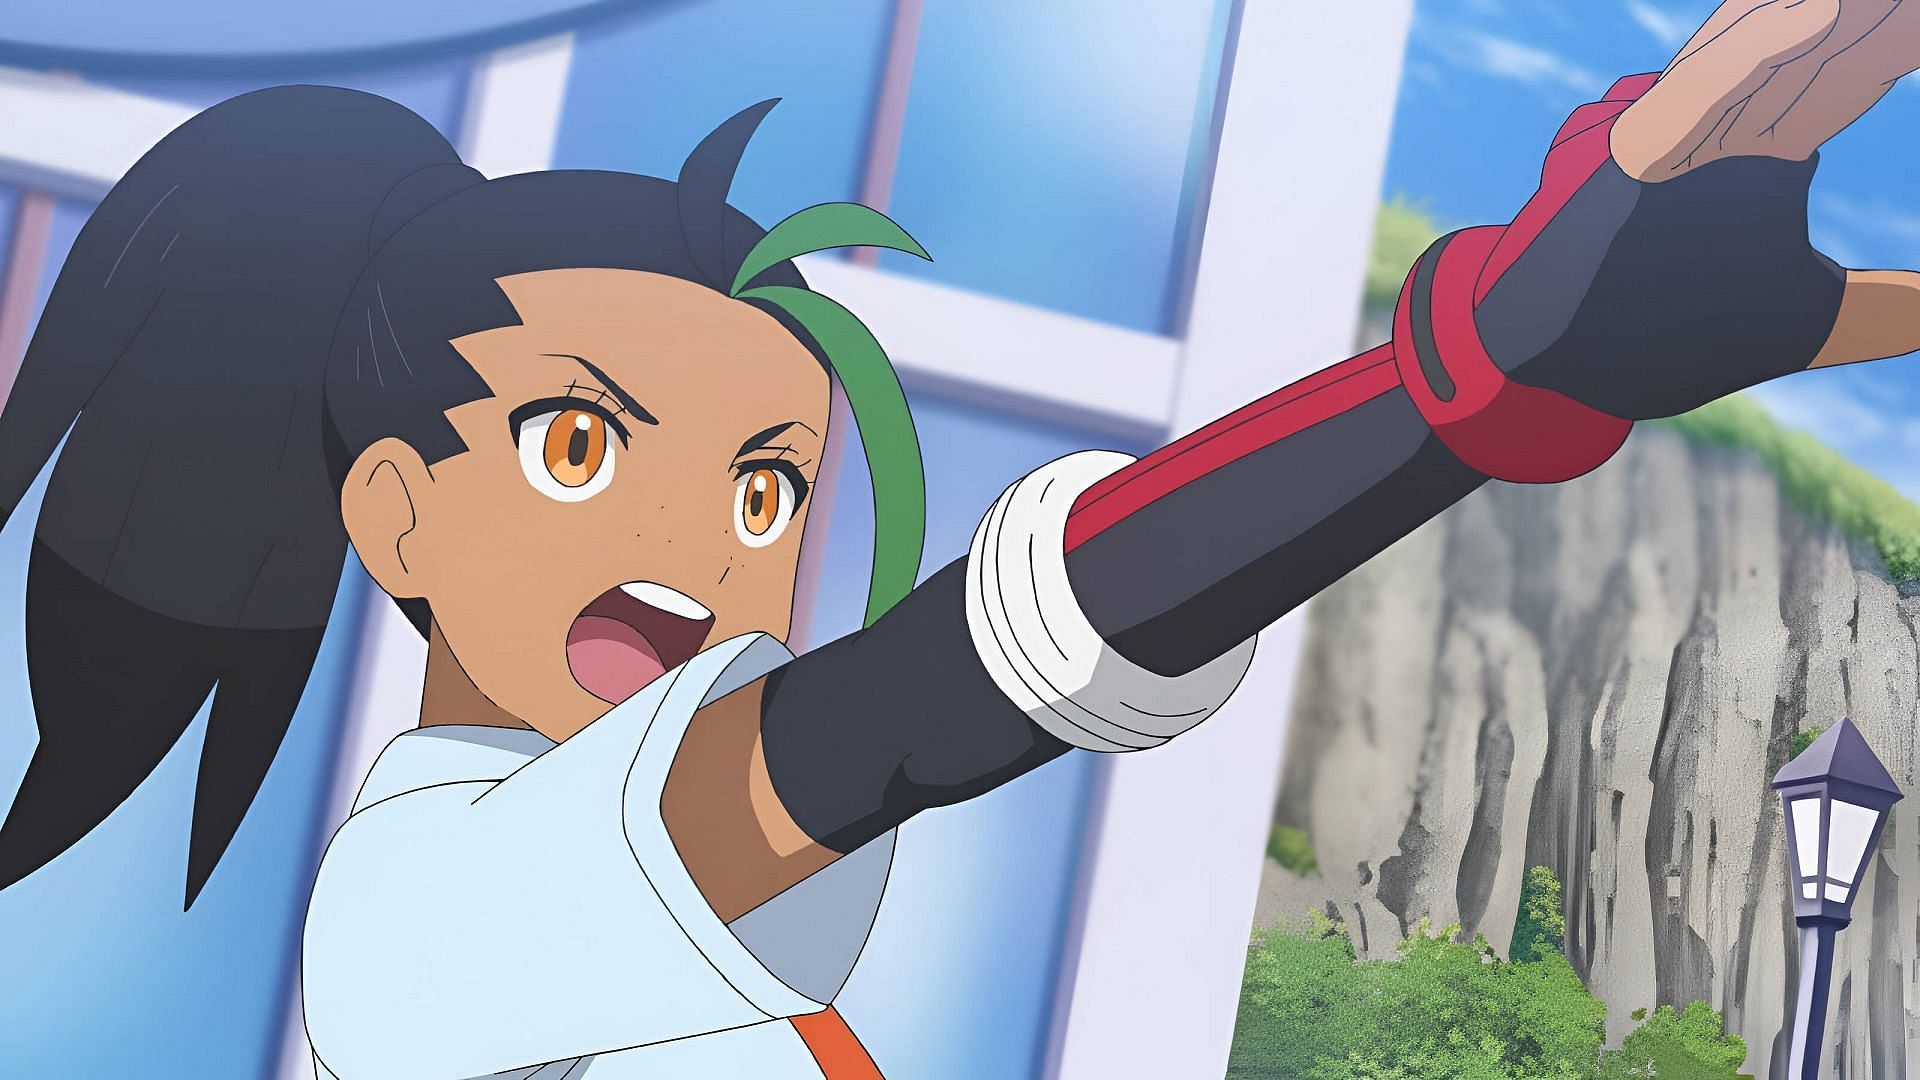 Pokemon Horizons Episode 10: Release date, where to watch, preview, and more